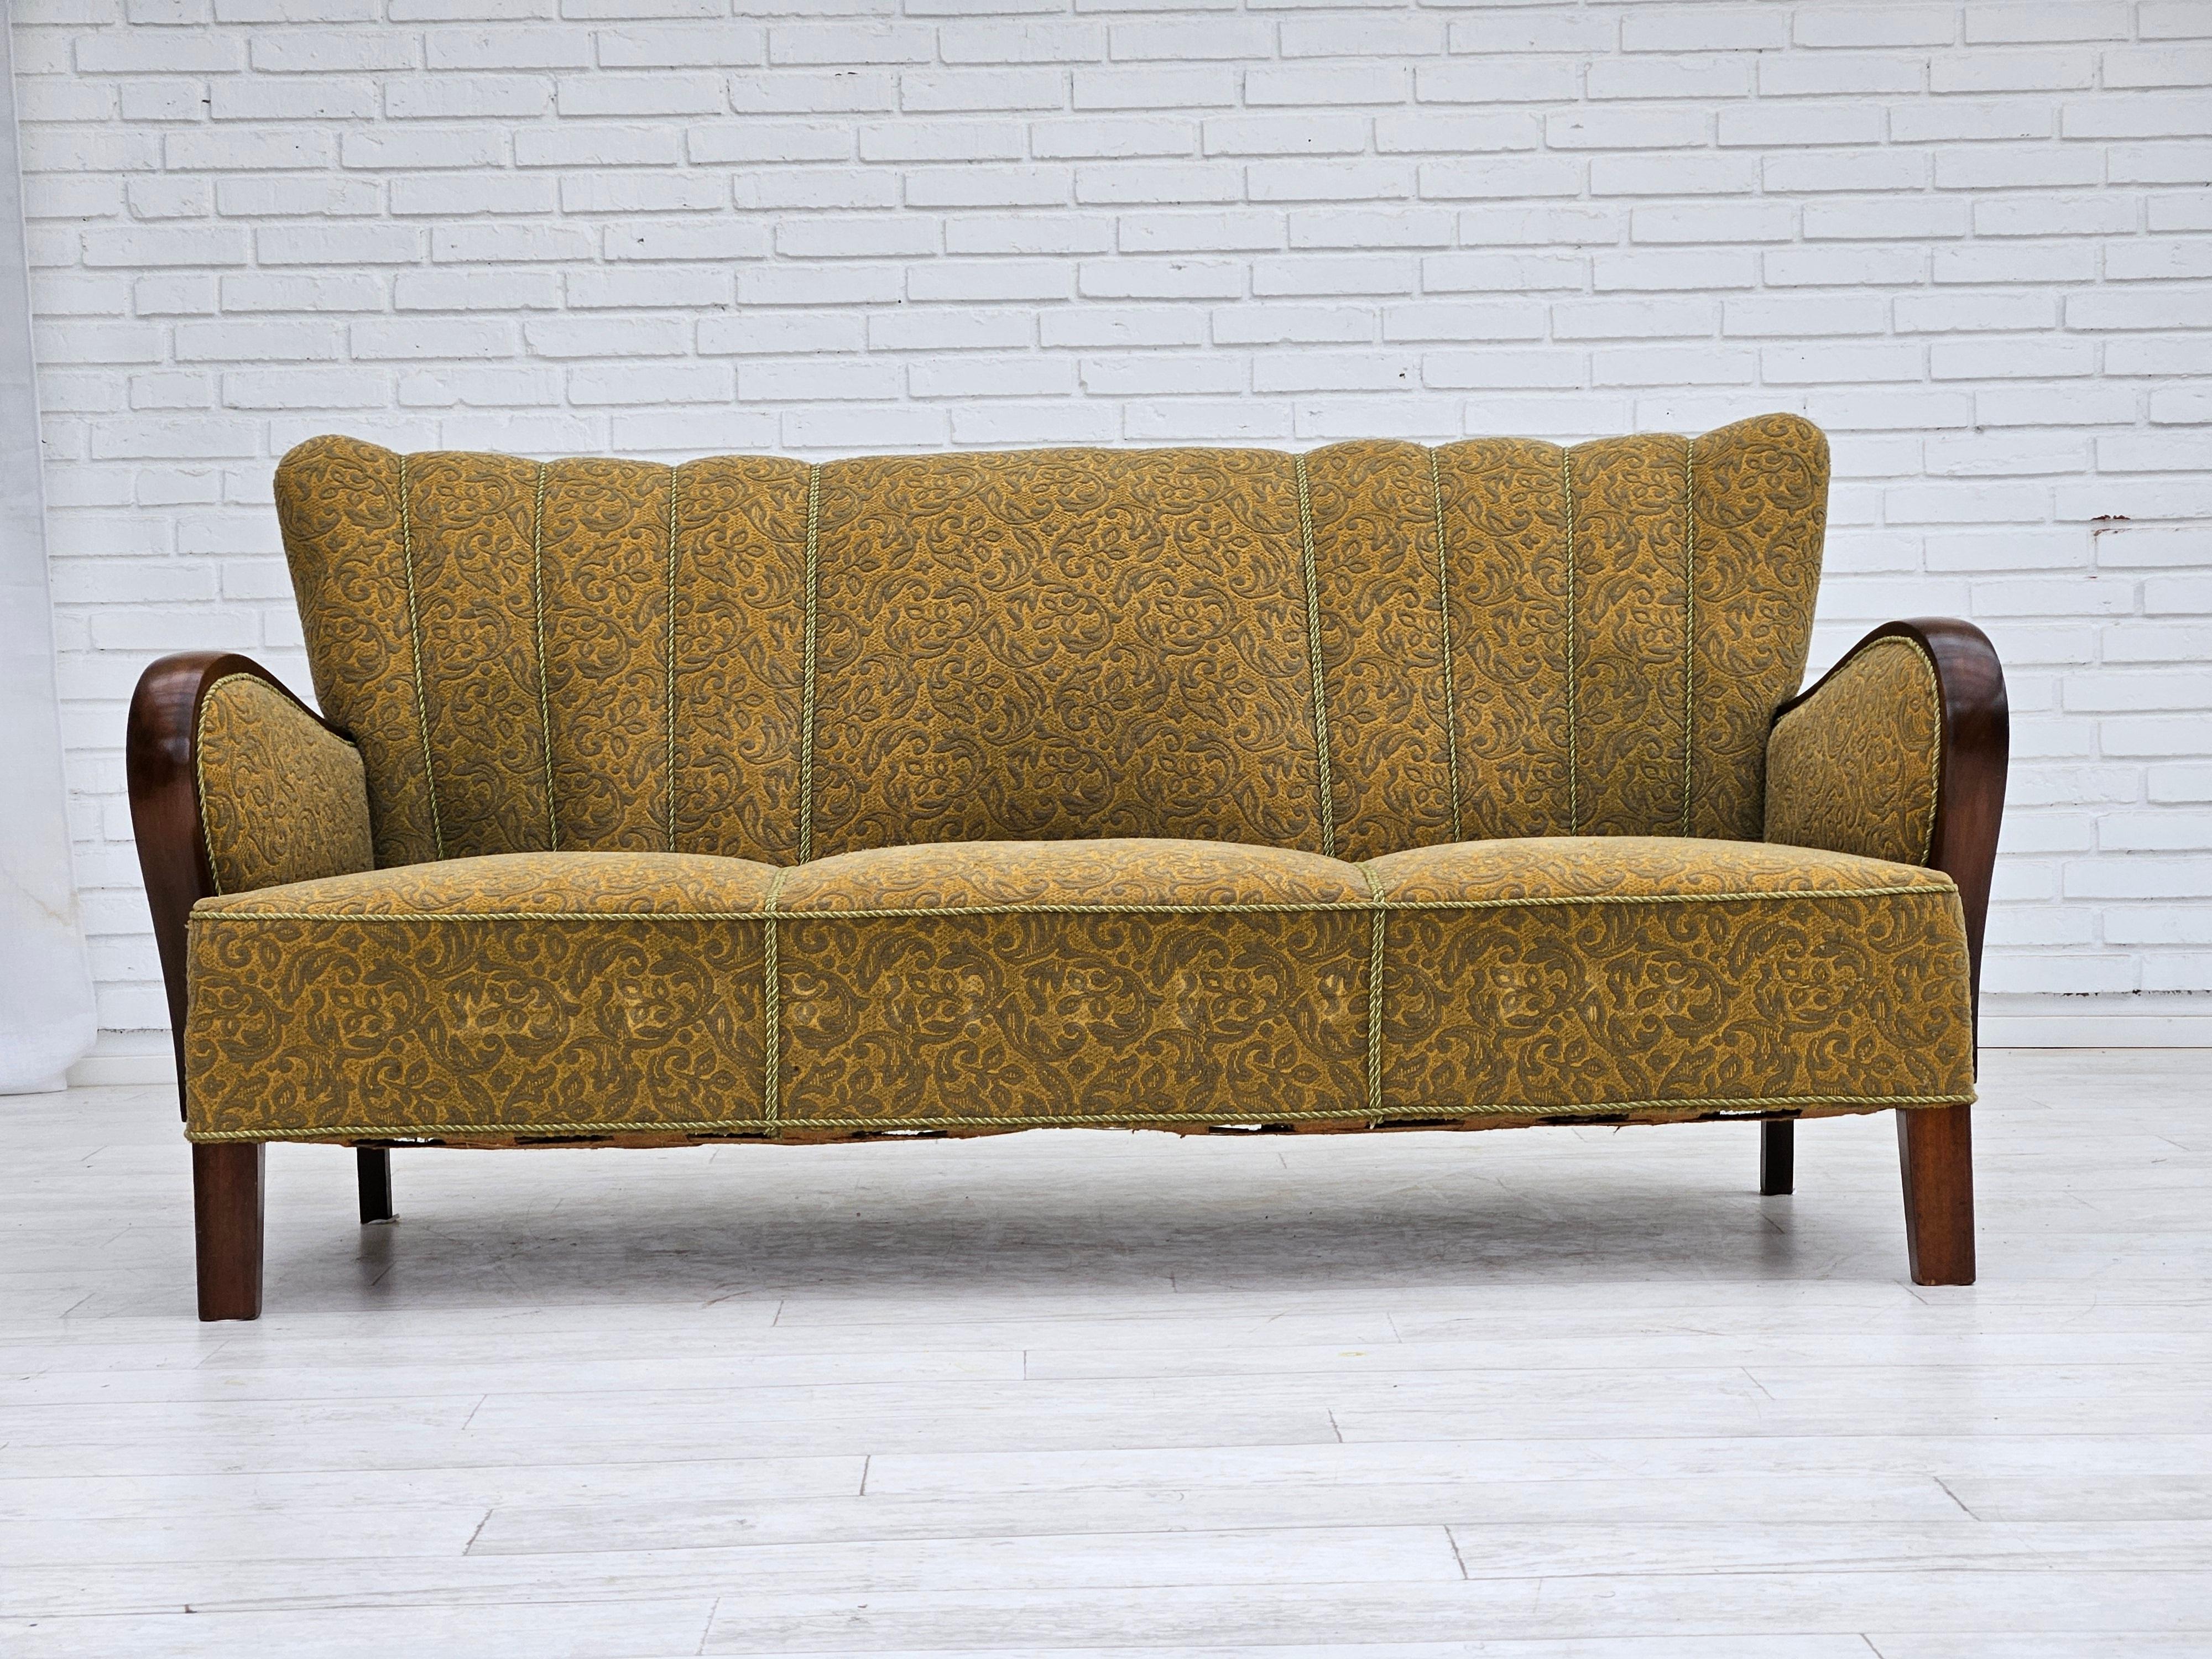 1960s, Danish 3 seater sofa in original very good condition: no smells and no stains. Light green furniture cotton/wool fabric, brass springs in the seat, beech wood legs. Manufactured by Danish furniture manufacturer in about 1960s. Sofa model to